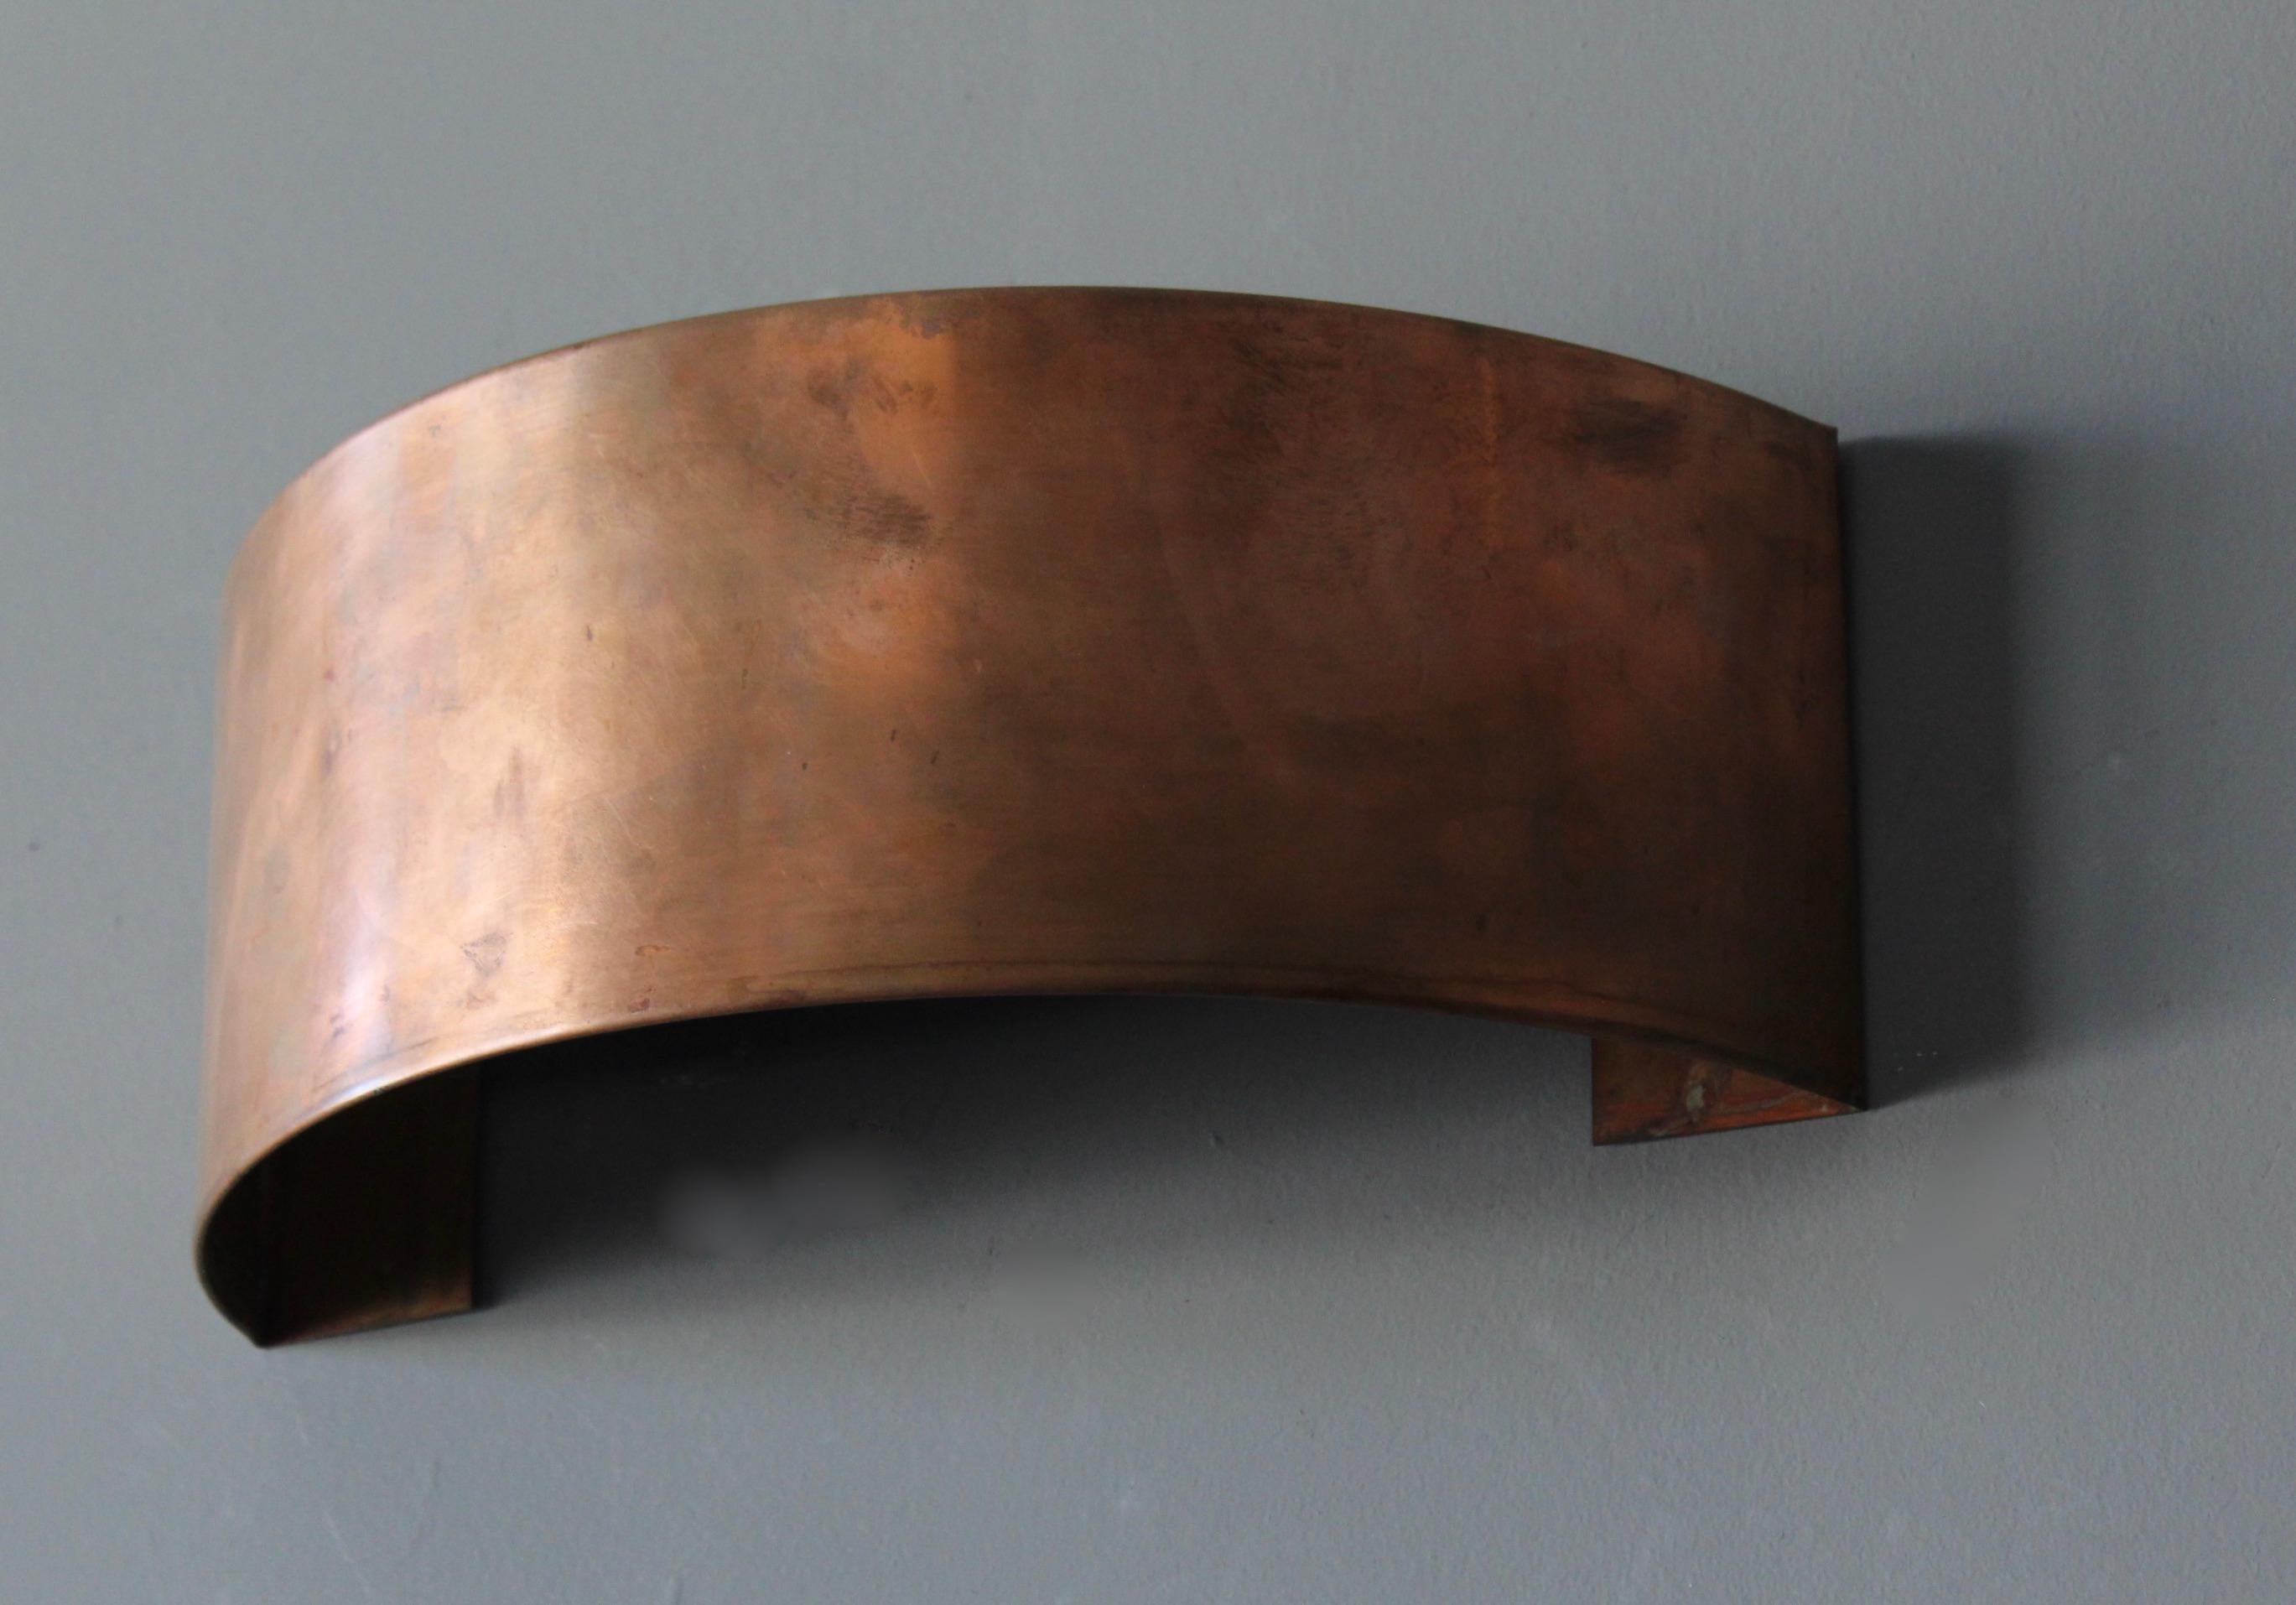 American Craft, Wall Light Sconce, Copper, United States, c. 1970s In Good Condition For Sale In High Point, NC